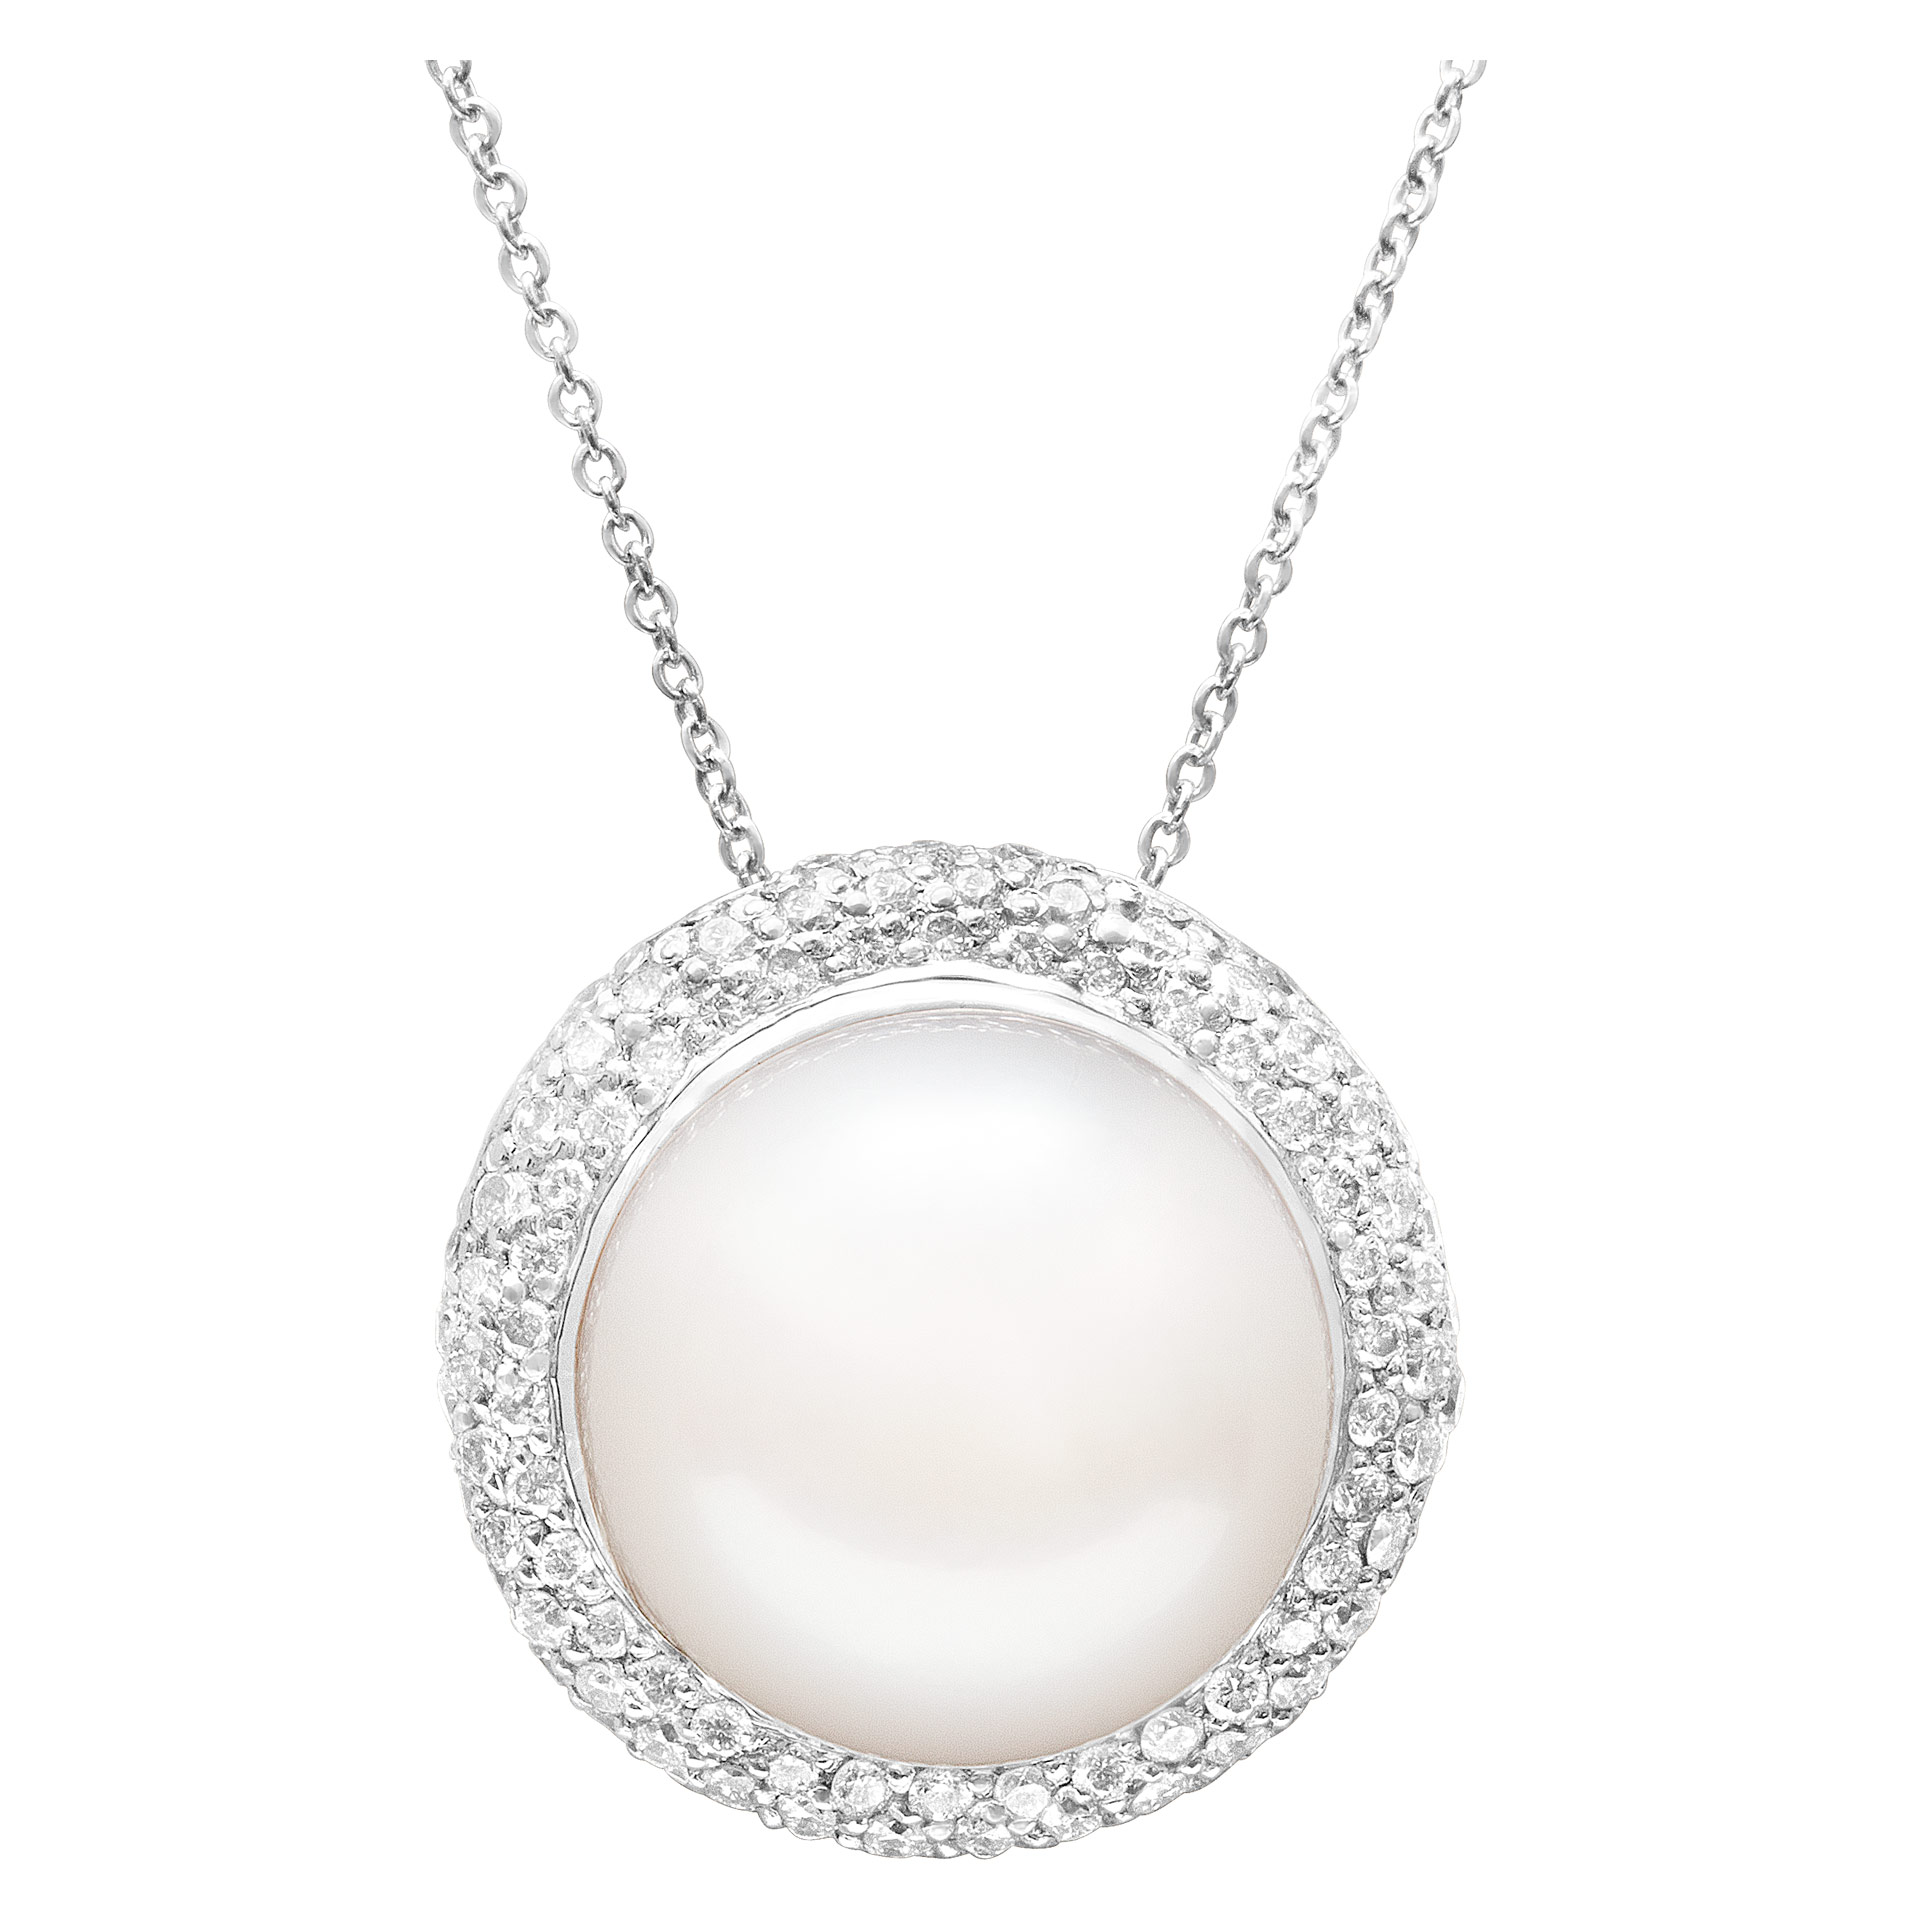 South Sea pearl pendant necklace with diamonds in 18k white gold chain. 0.77cts